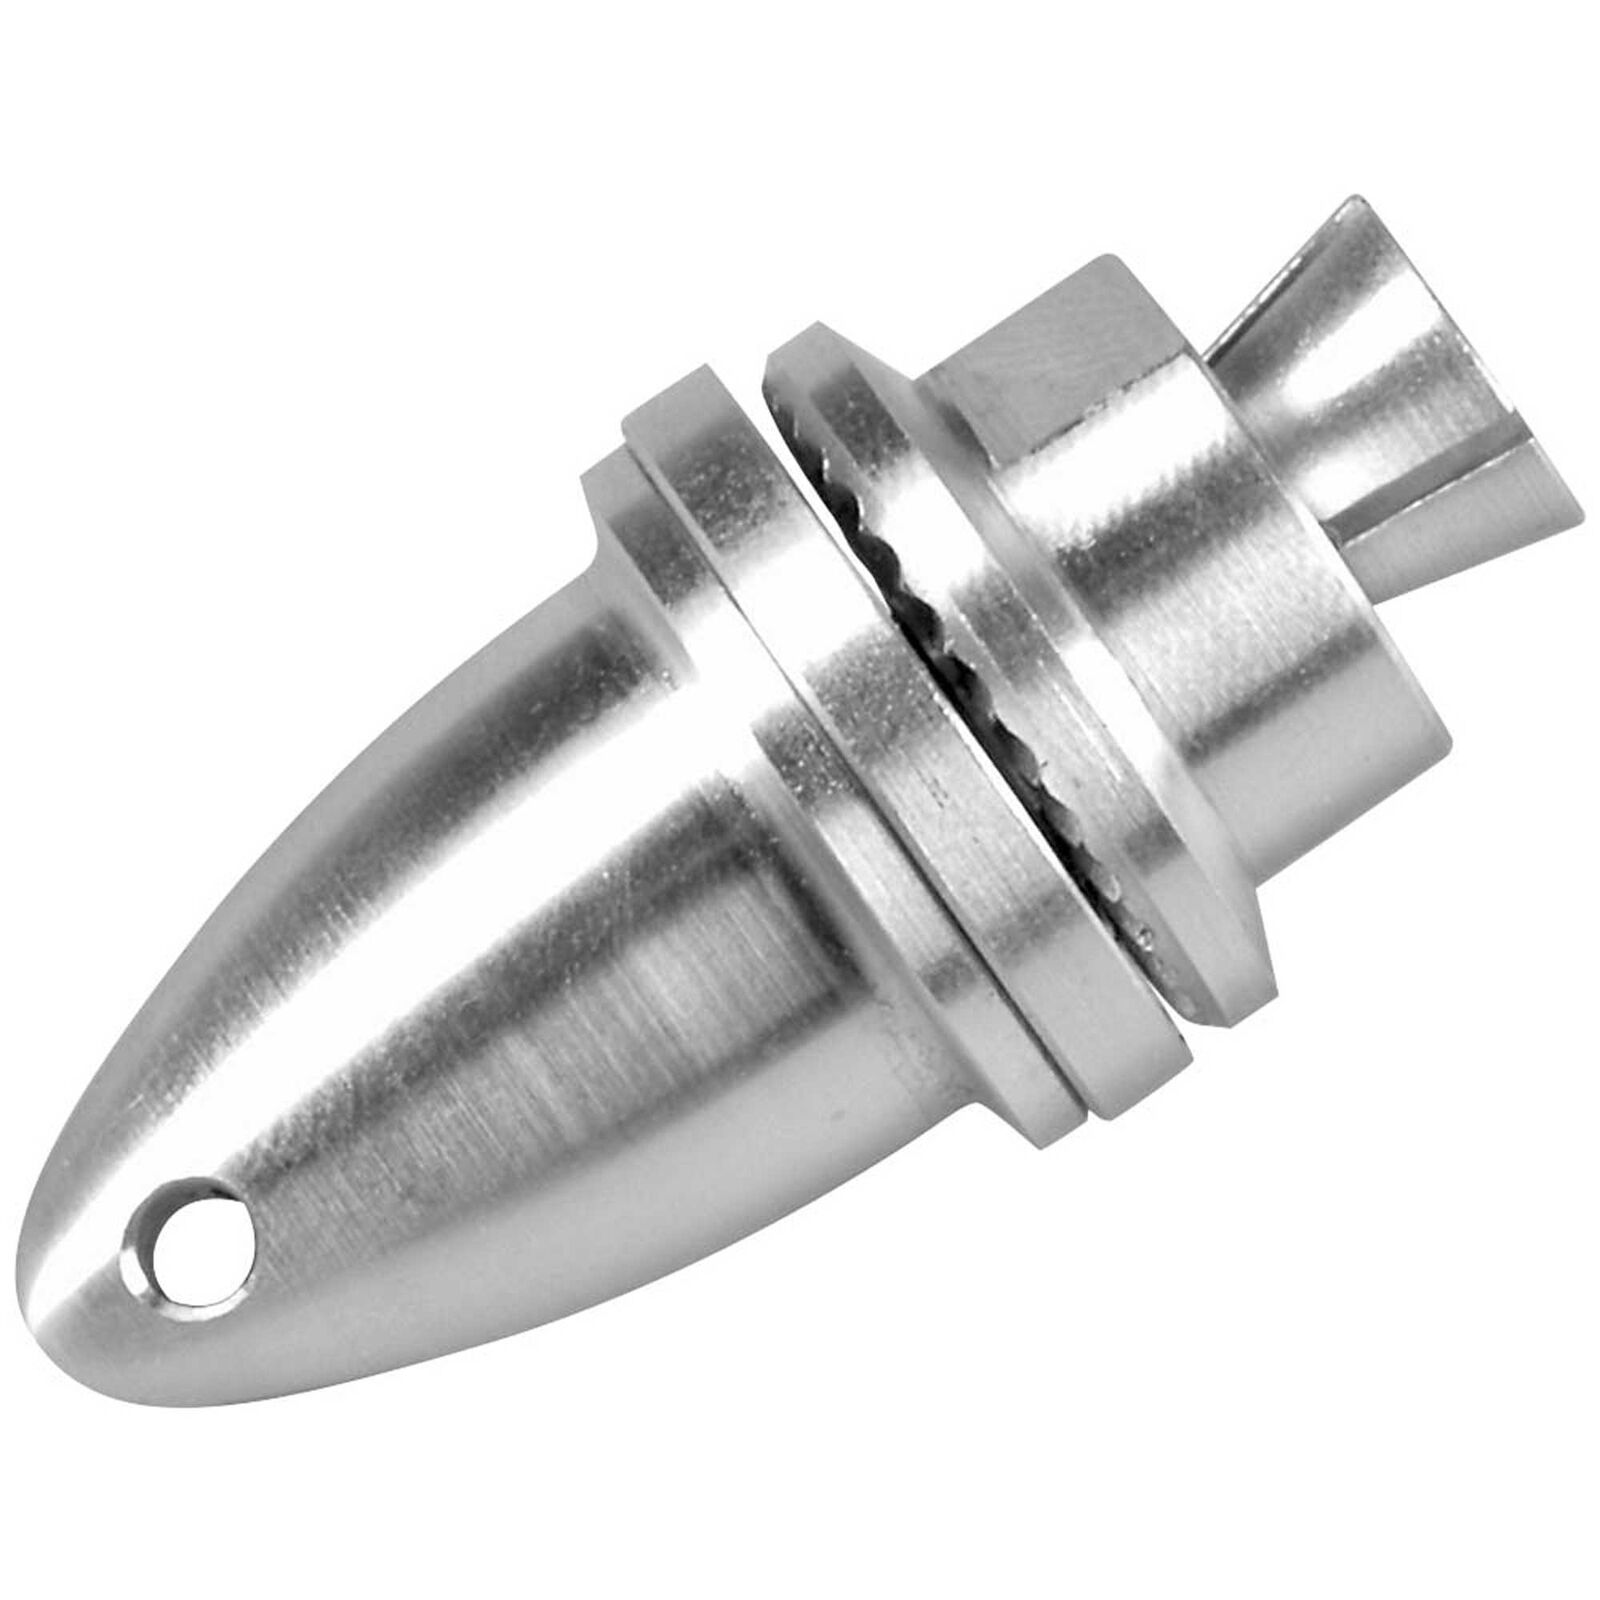 Collet Cone Adapter 5mm-5 16x24 Prop Shaft